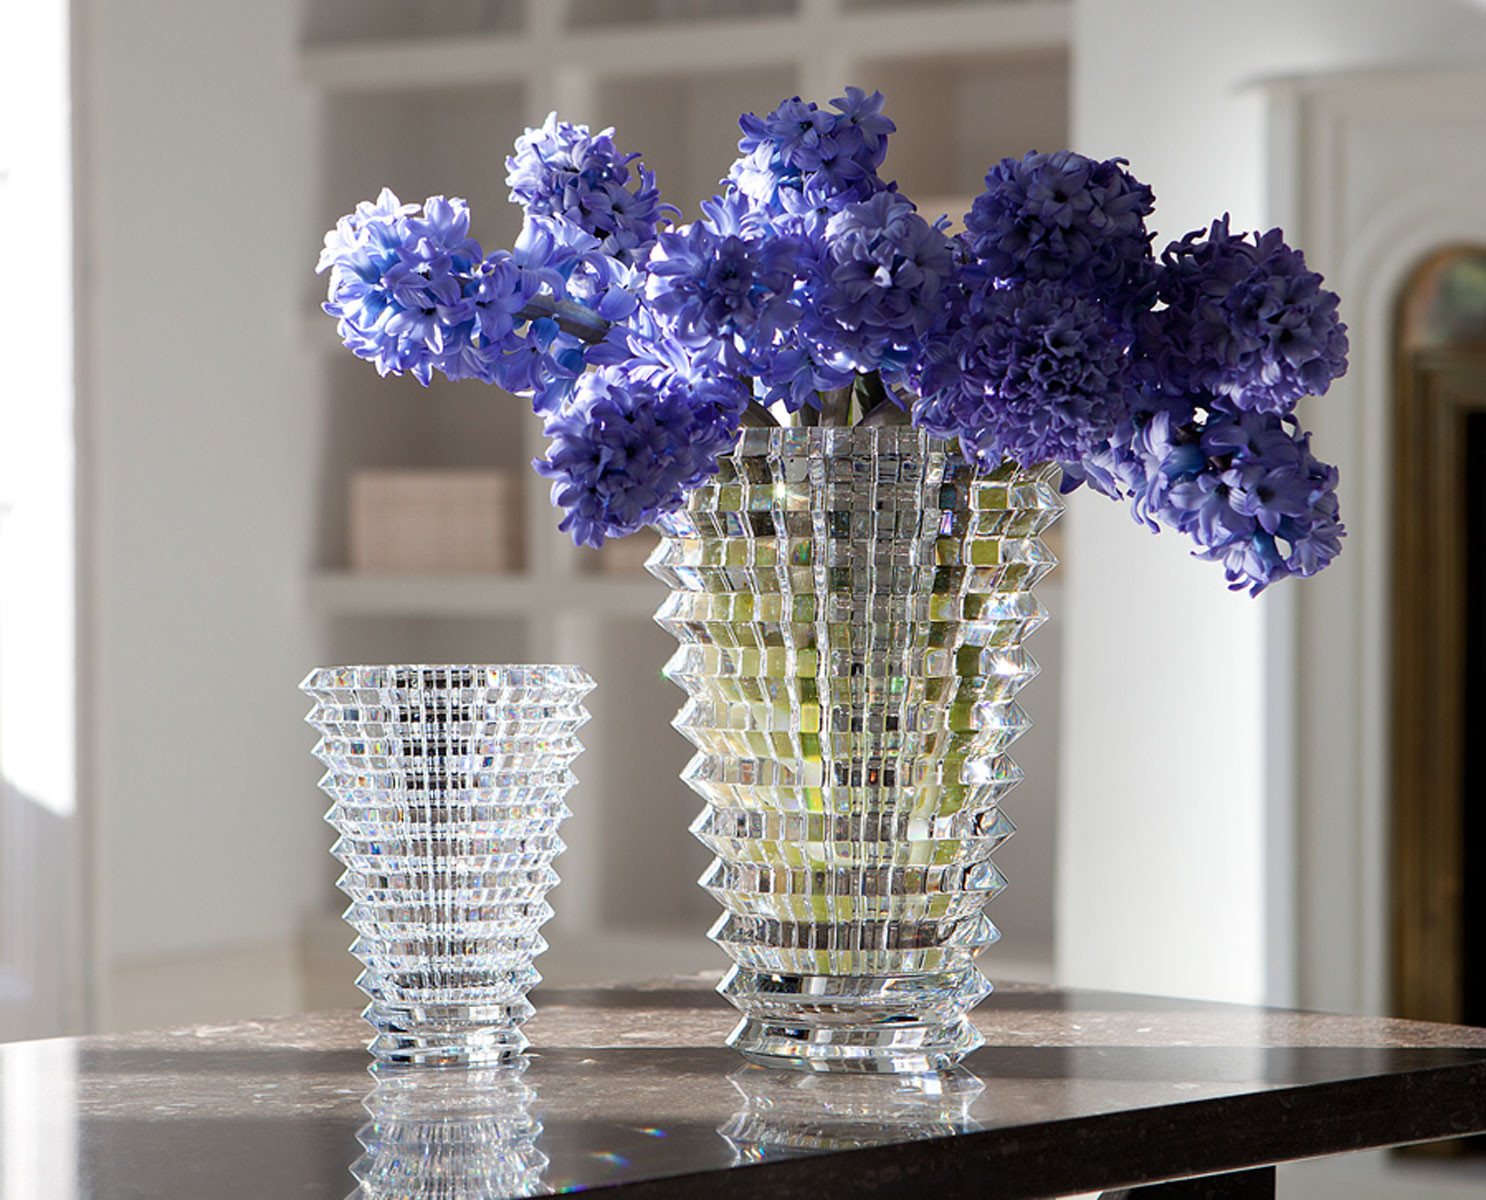 10 attractive Short Vase Centerpiece Ideas 2024 free download short vase centerpiece ideas of small vase flower ideas flowers healthy for vases design pictures blue flower baccarat crystal vase two diffe size large and small simple